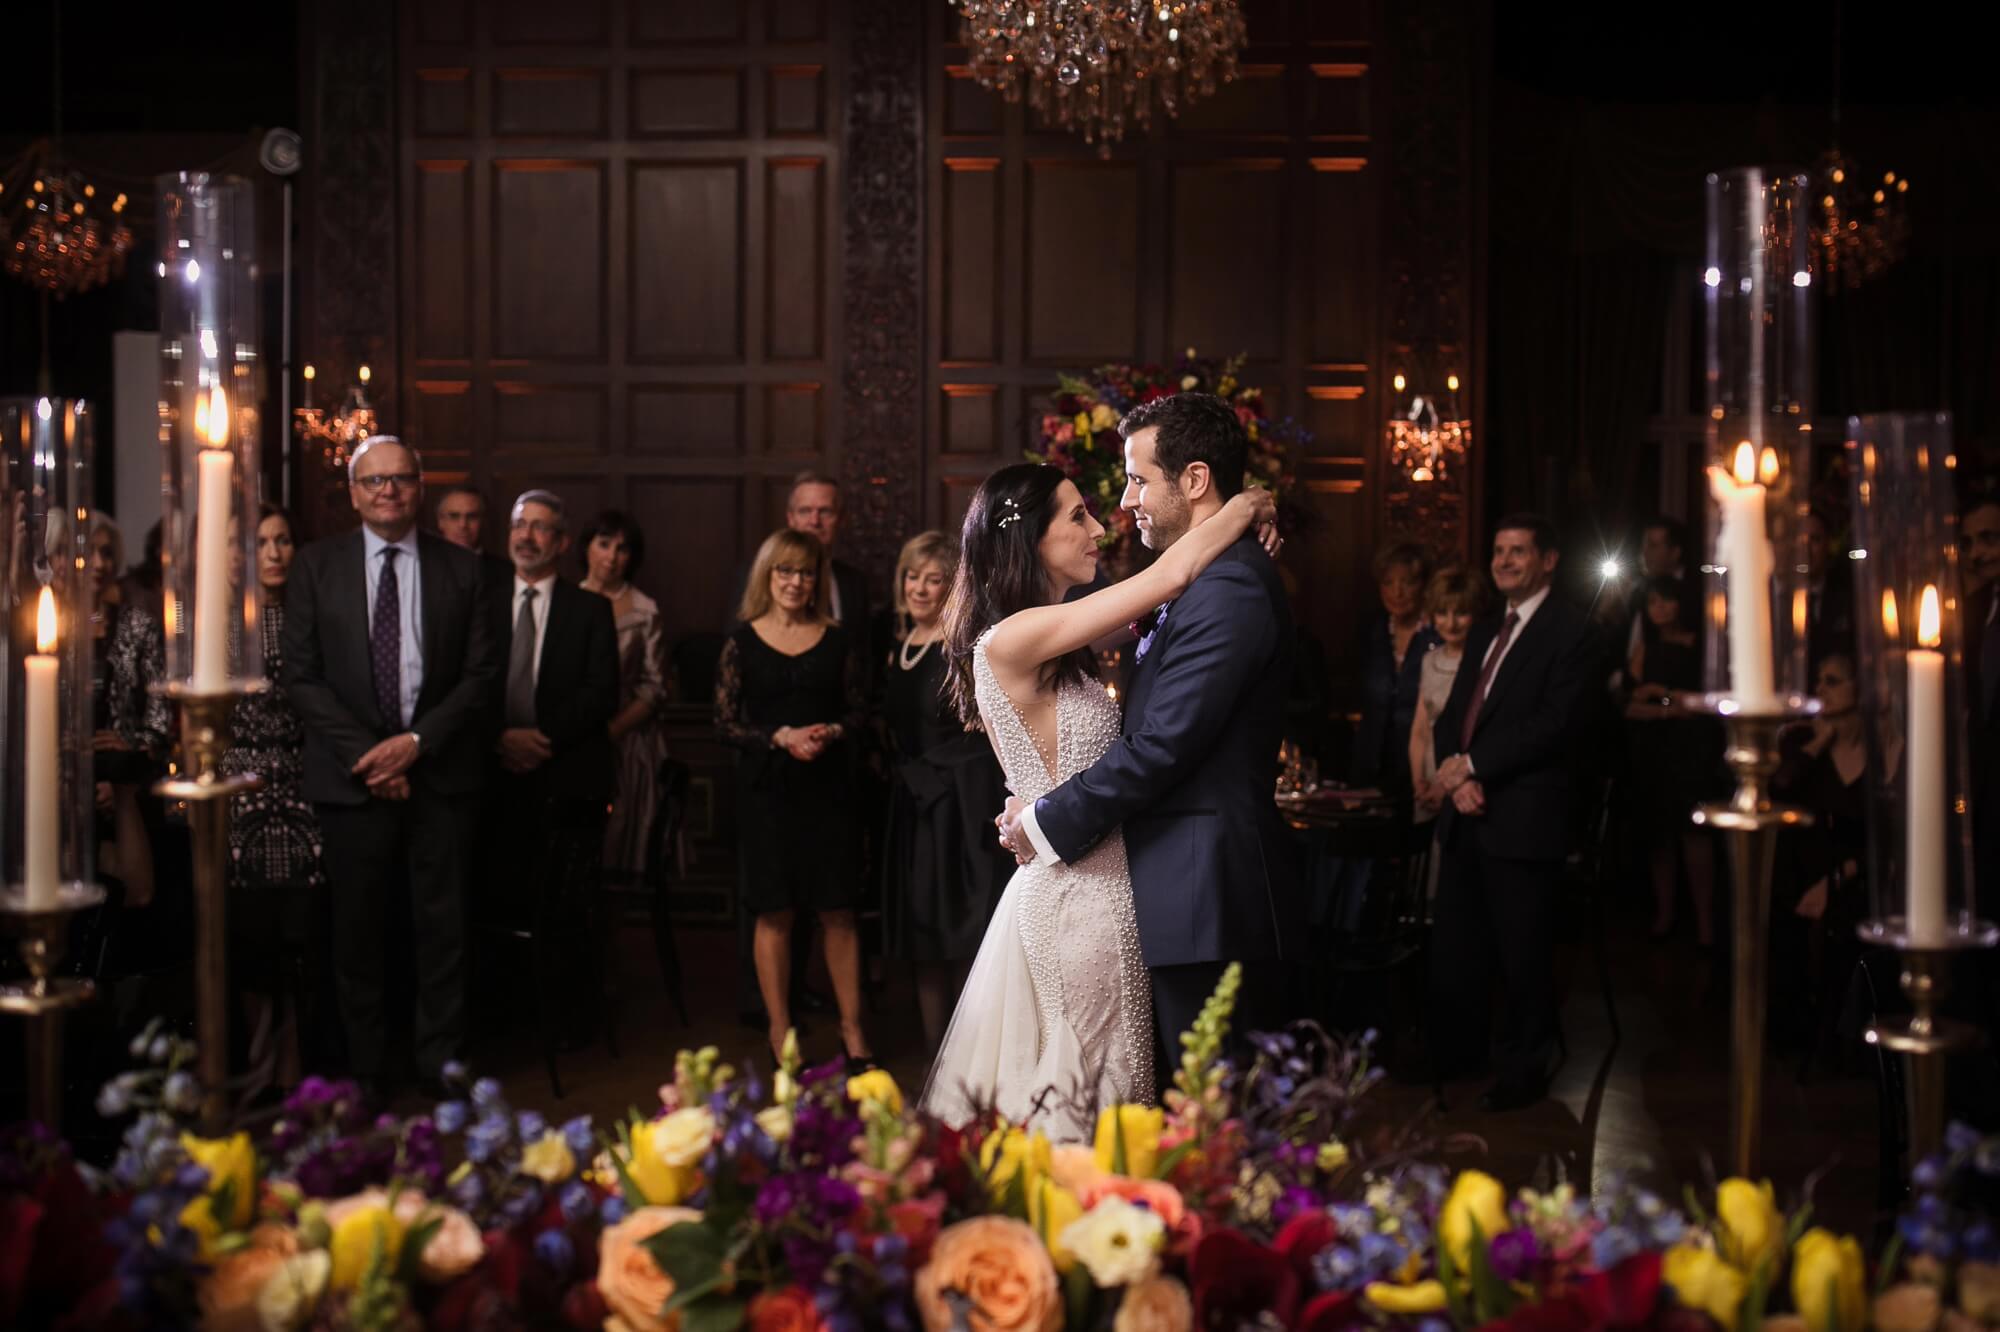 Stunning portrait of the bride and grooms first dance decorated with flowers and candles at Casa Loma in Toronto